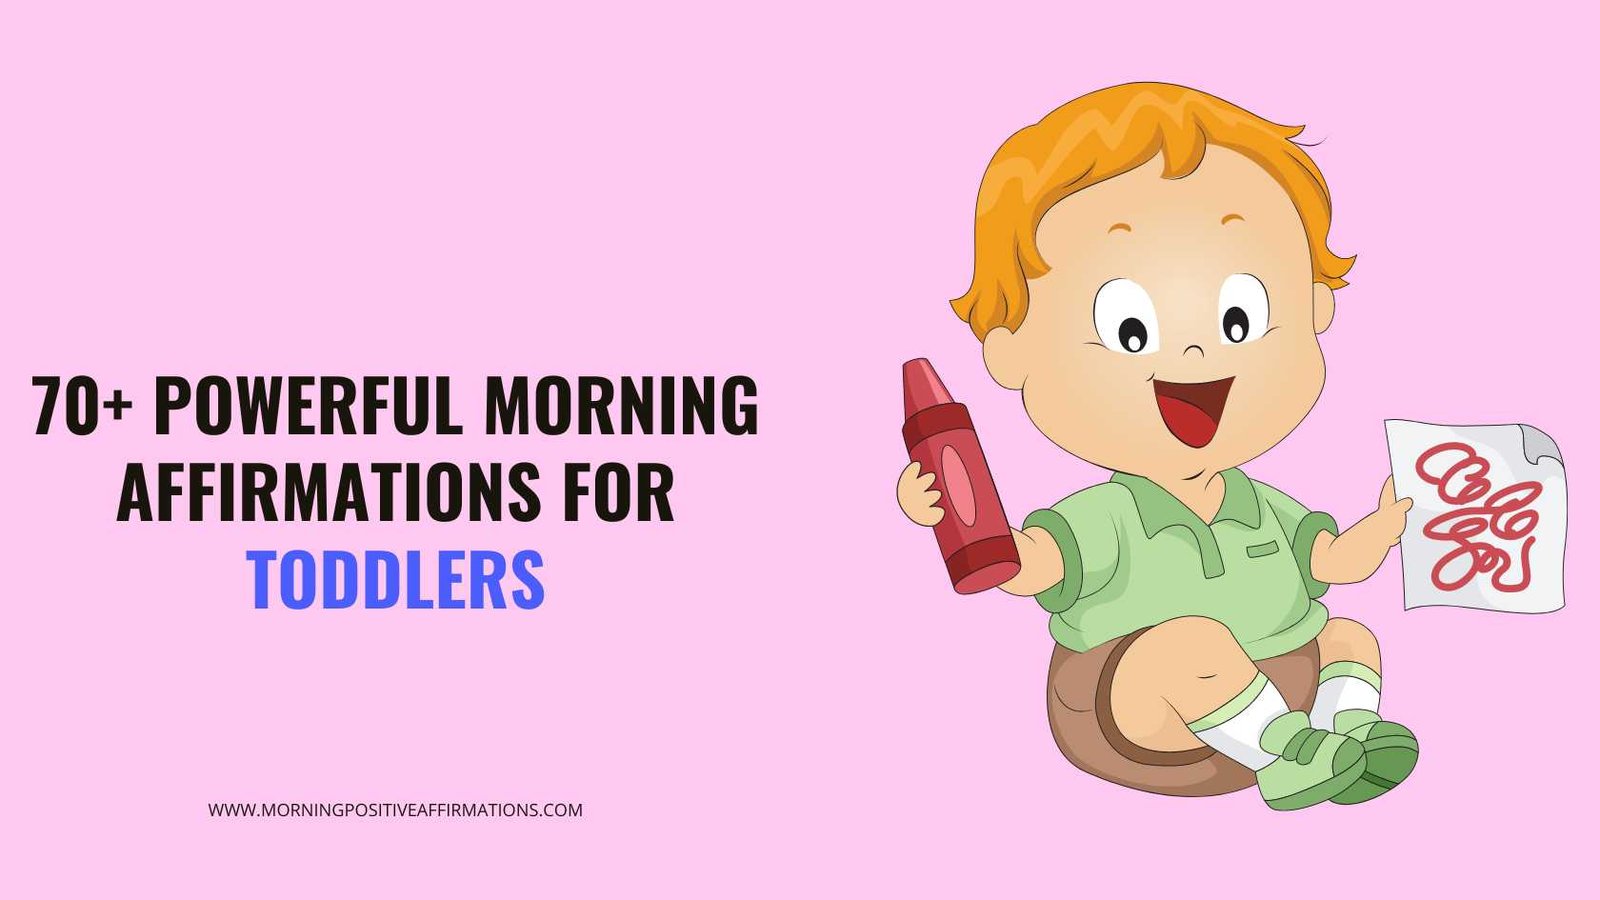 Morning Affirmations for Toddlers